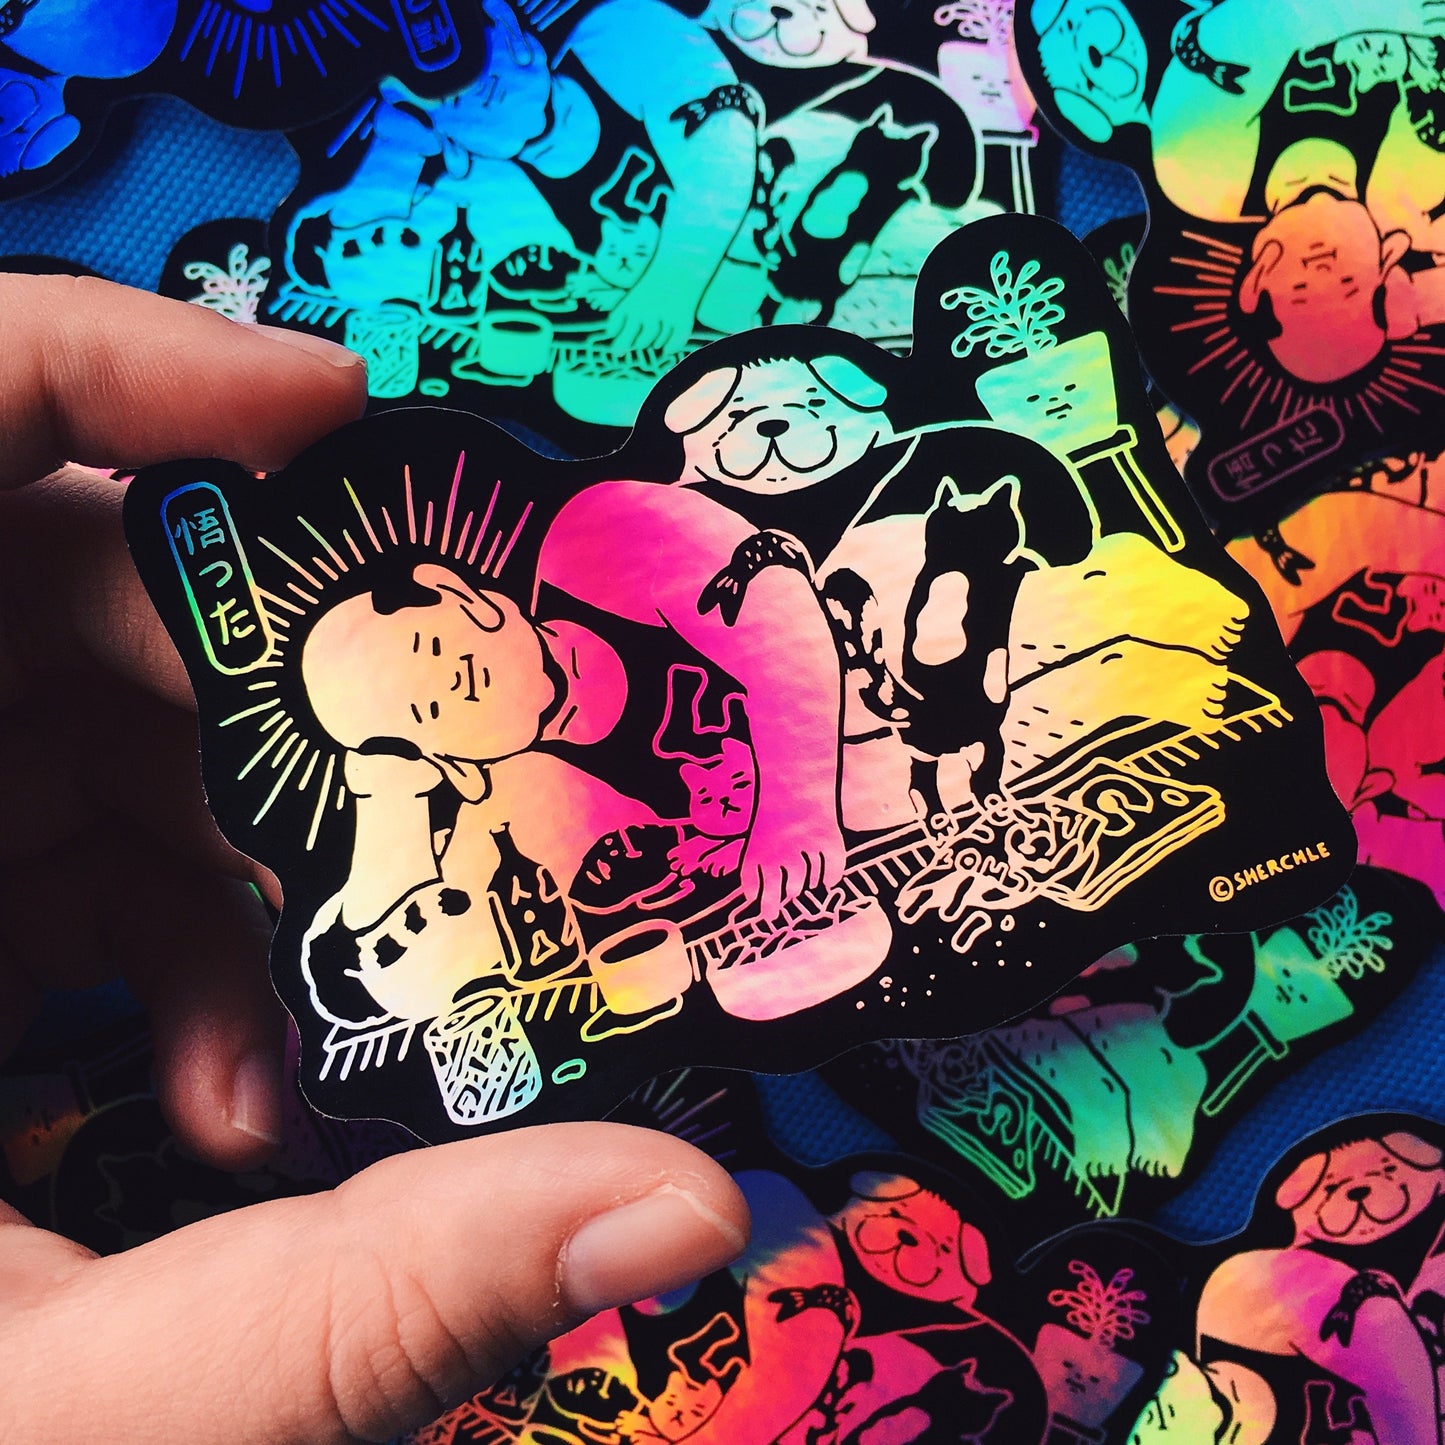 The Enlightened Man Holographic Sticker